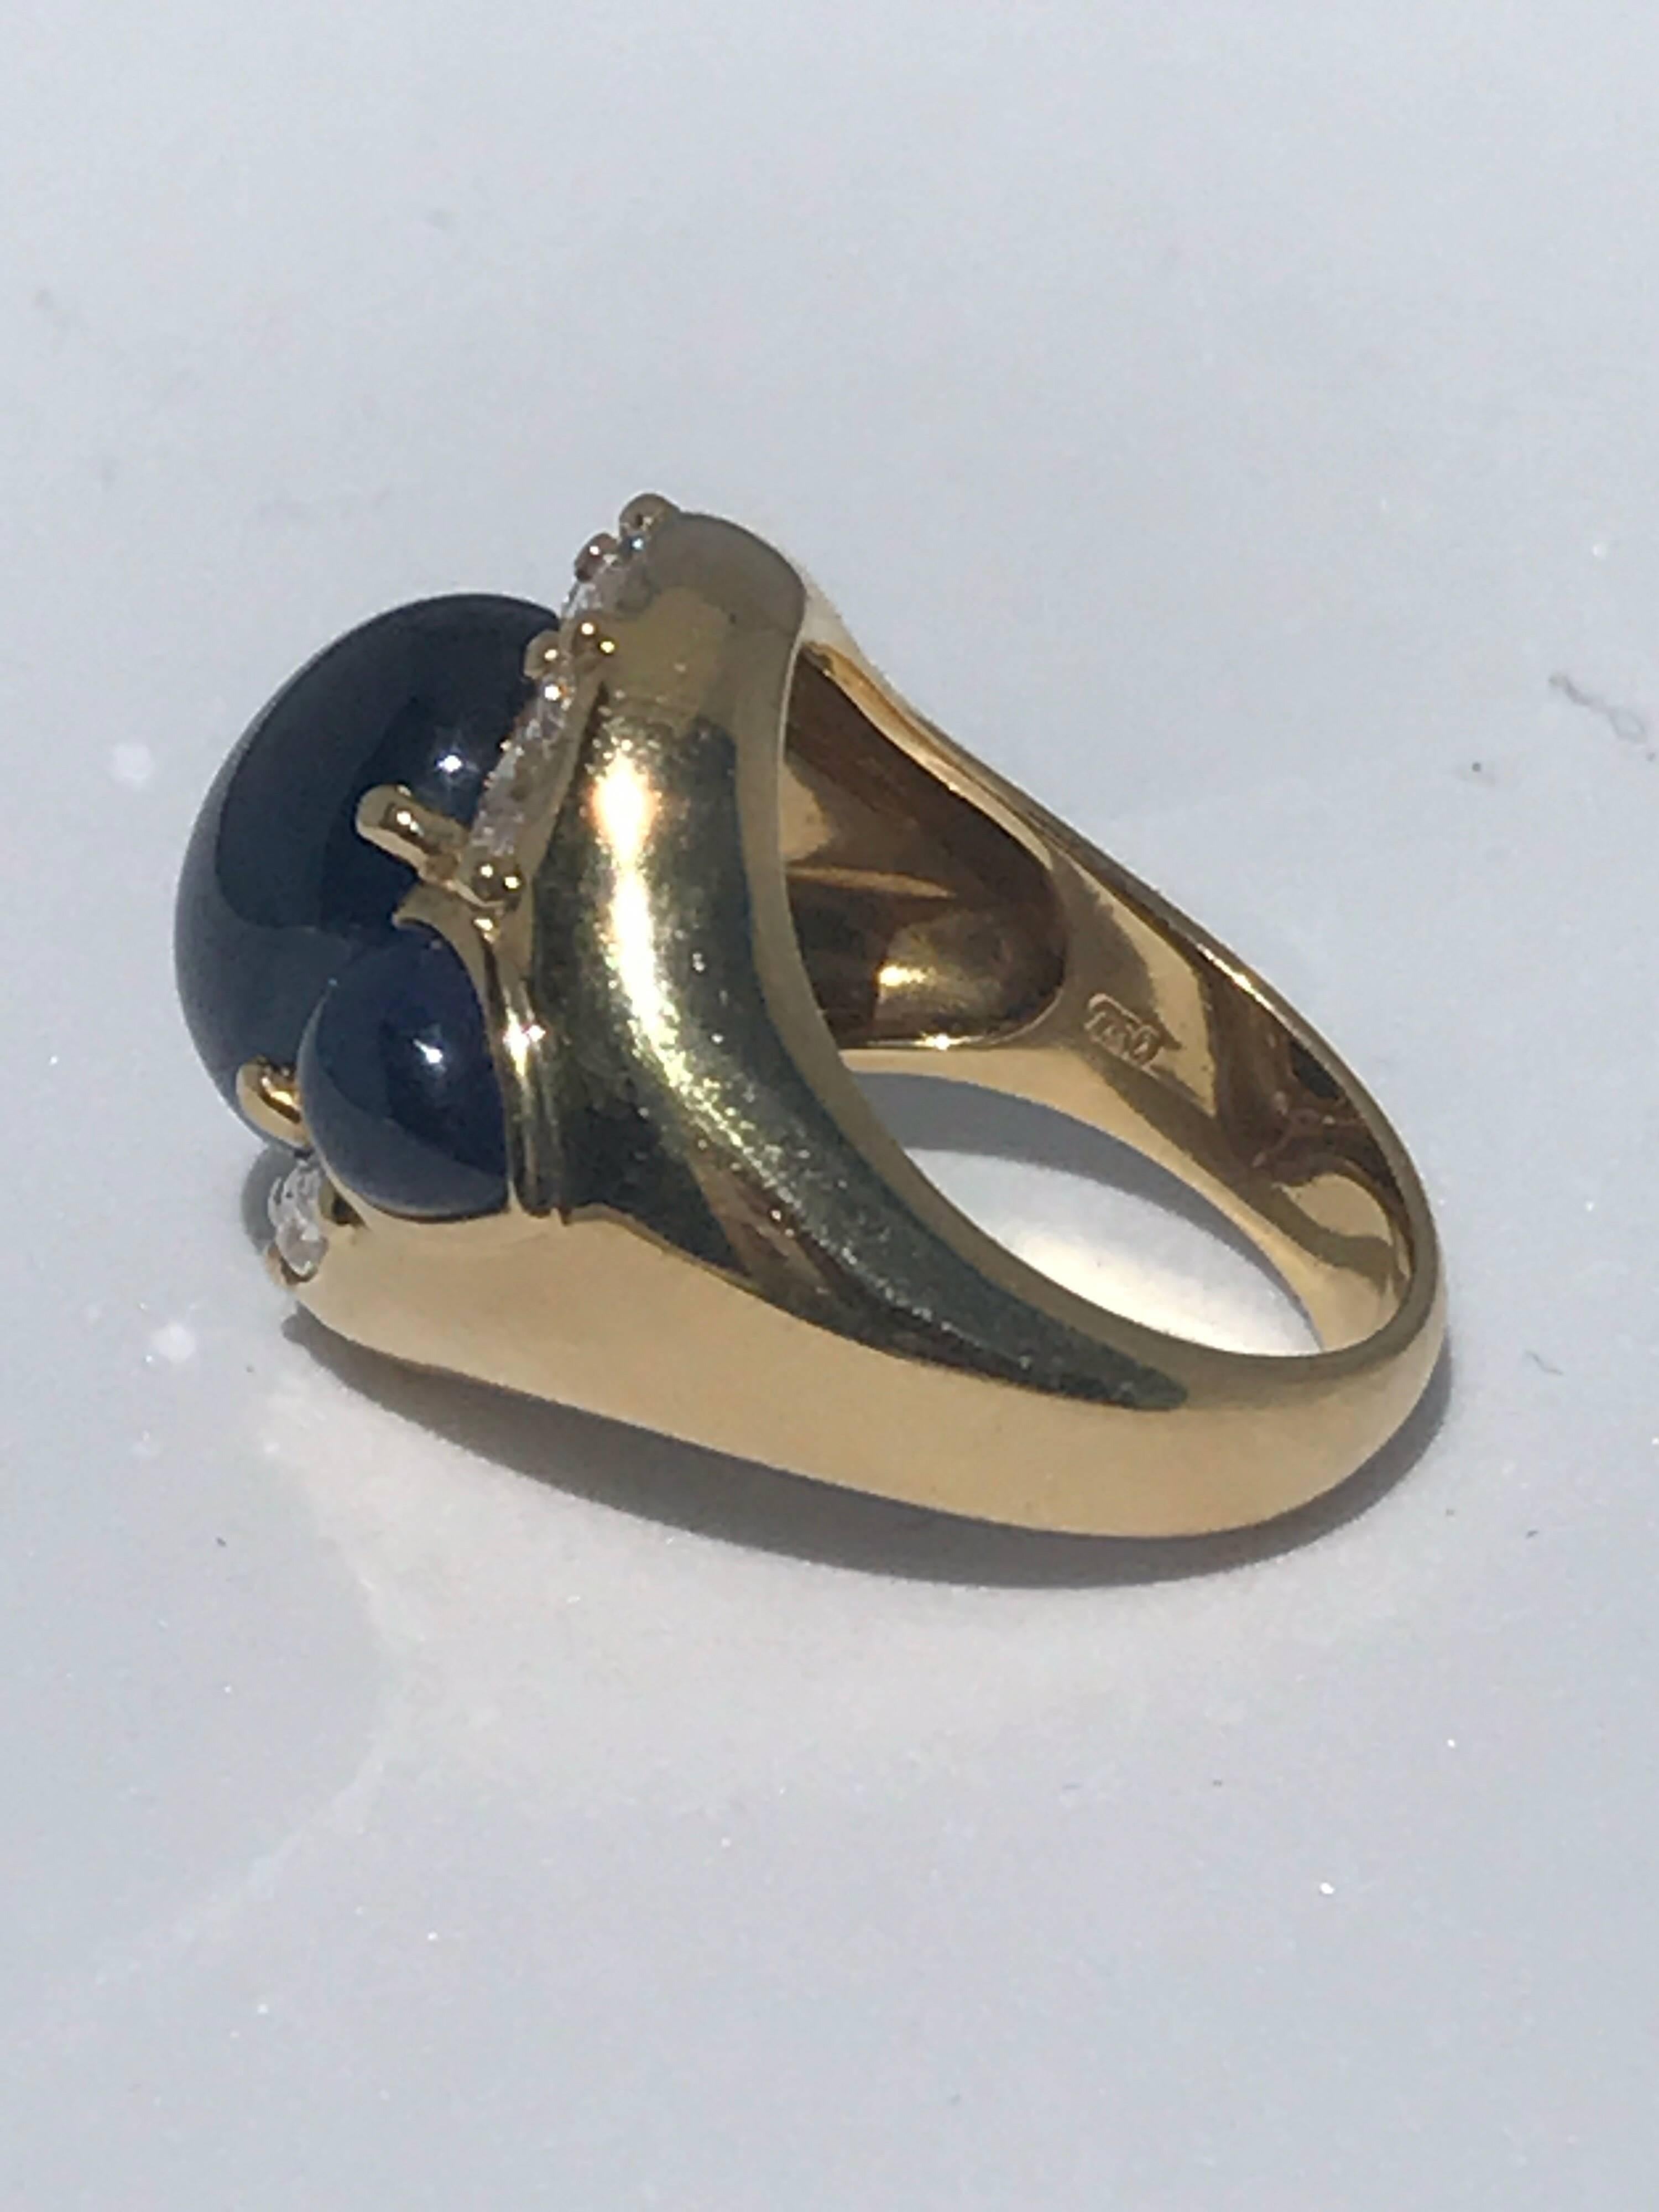 Cabochon Sapphire and Diamond 1970s 18 Karat Gold Dress Ring For Sale 2